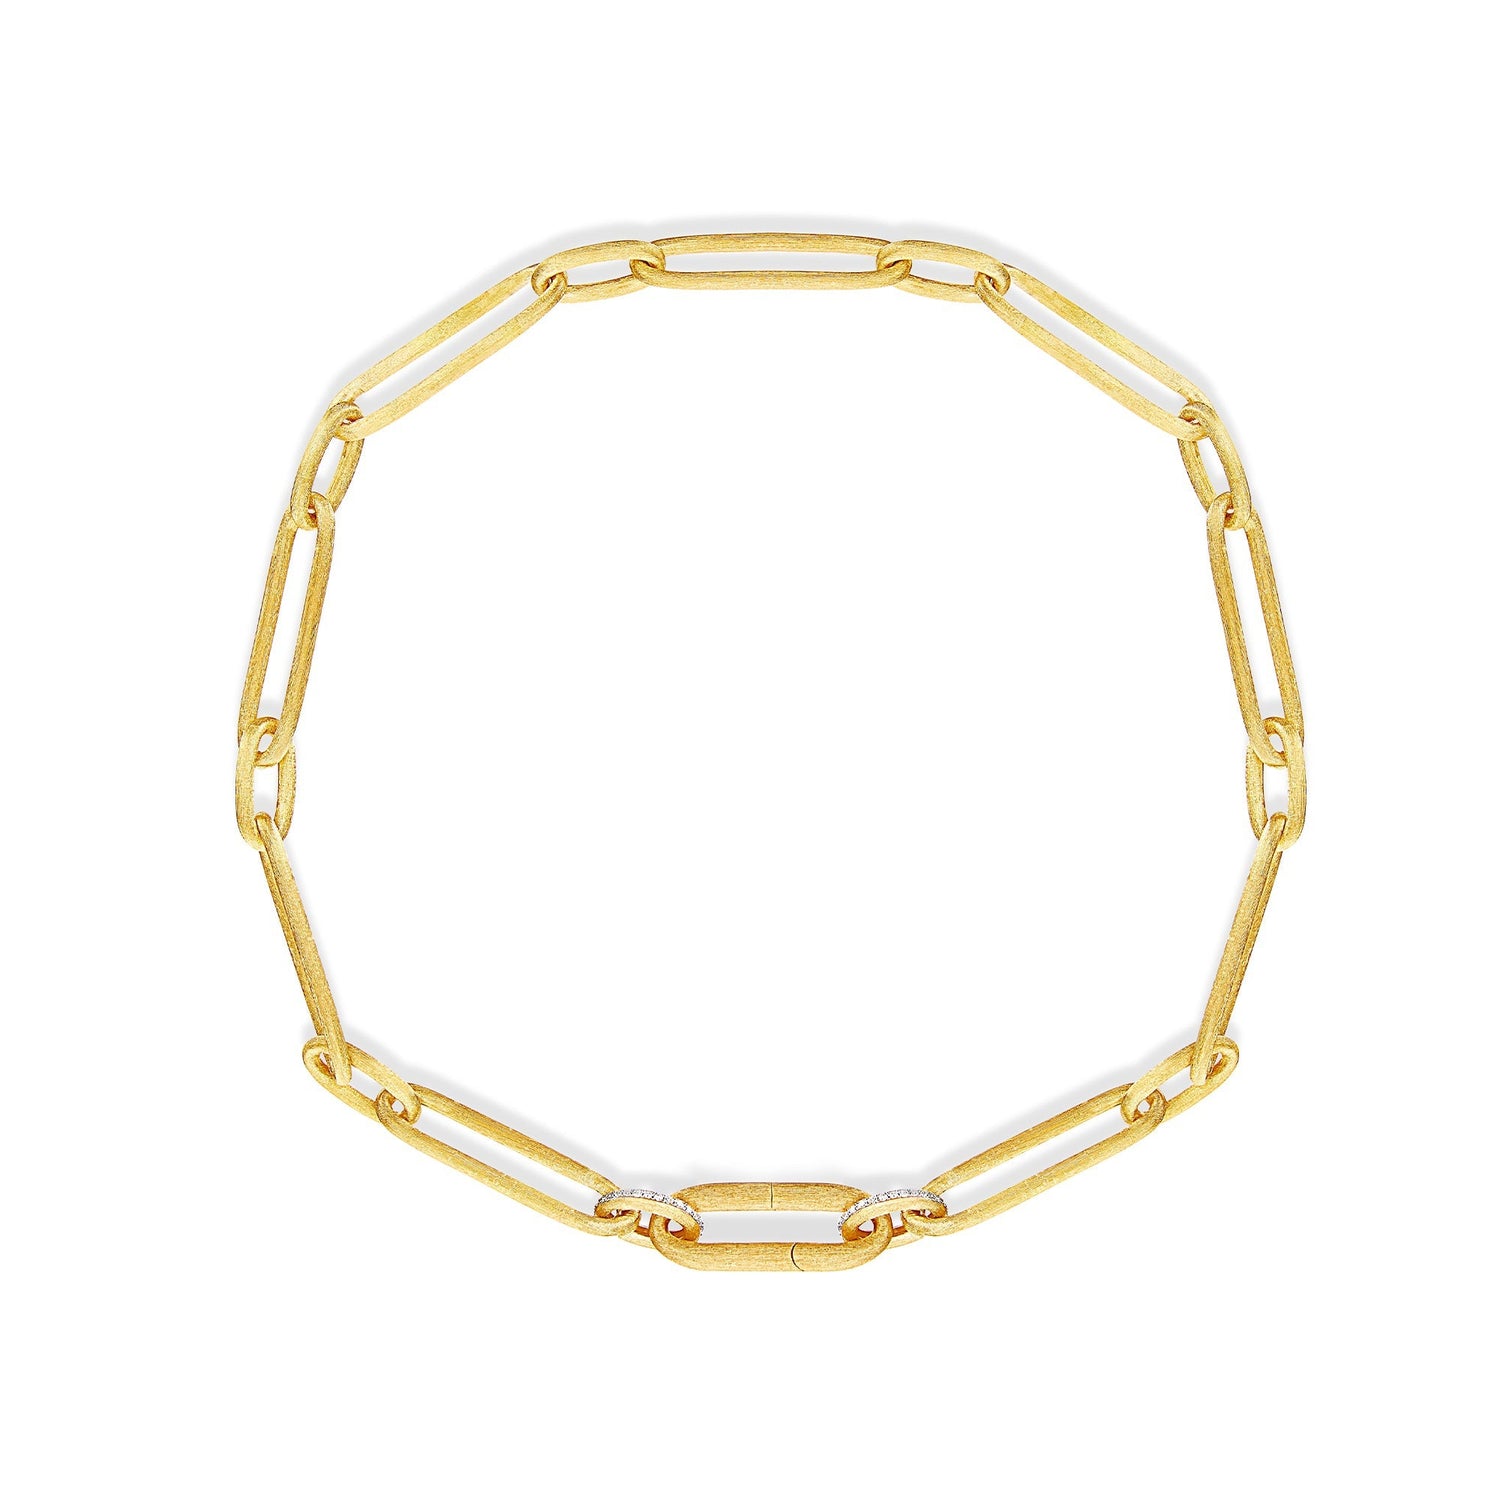 "LIBERA" GOLD NECKLACE CHAIN WITH DIAMONDS